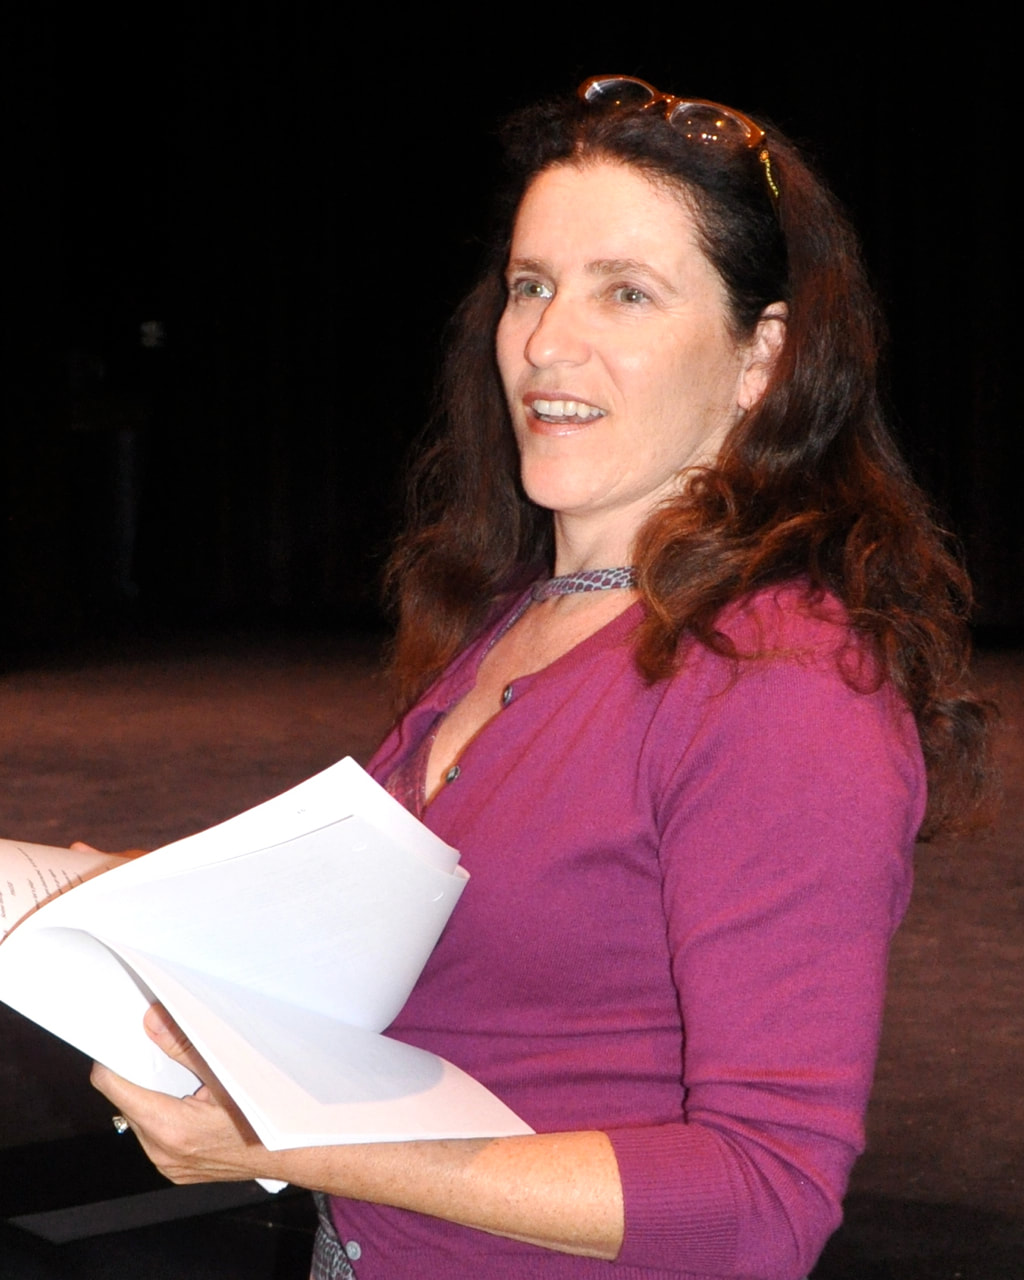 Aimee Greenberg at a rehearsal for the play Light Falling Down